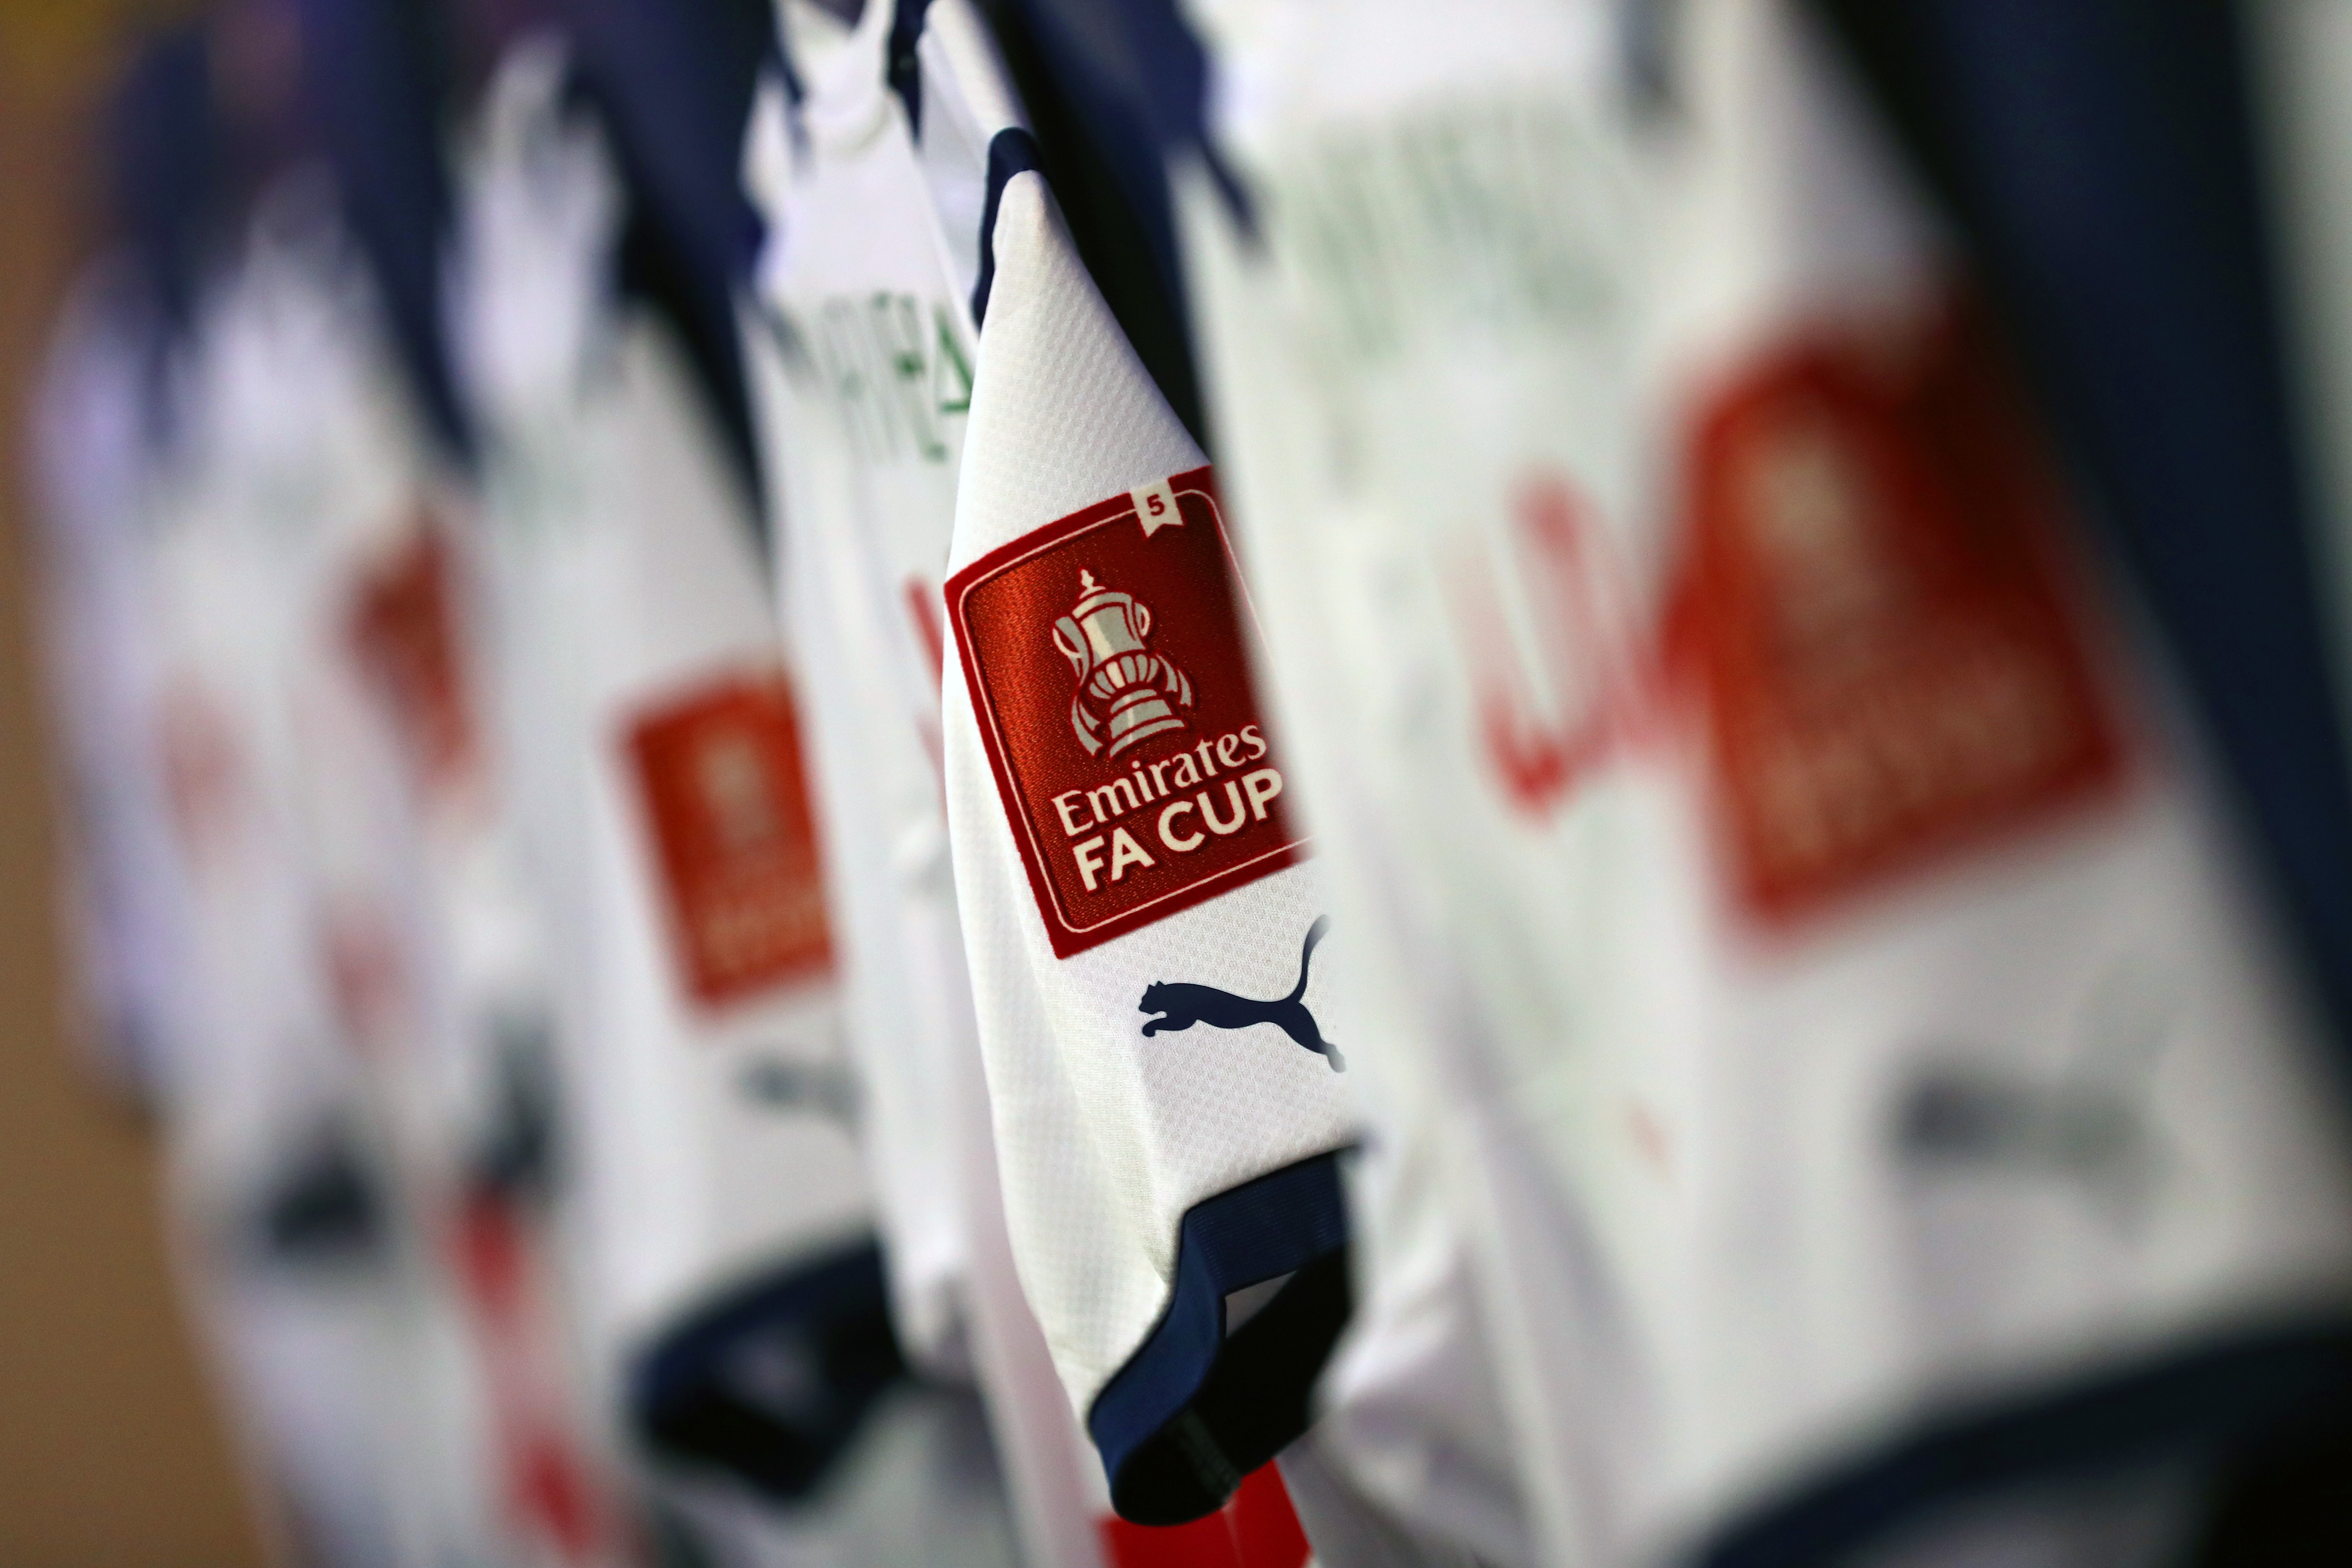 An FA Cup logo on the Albion shirt